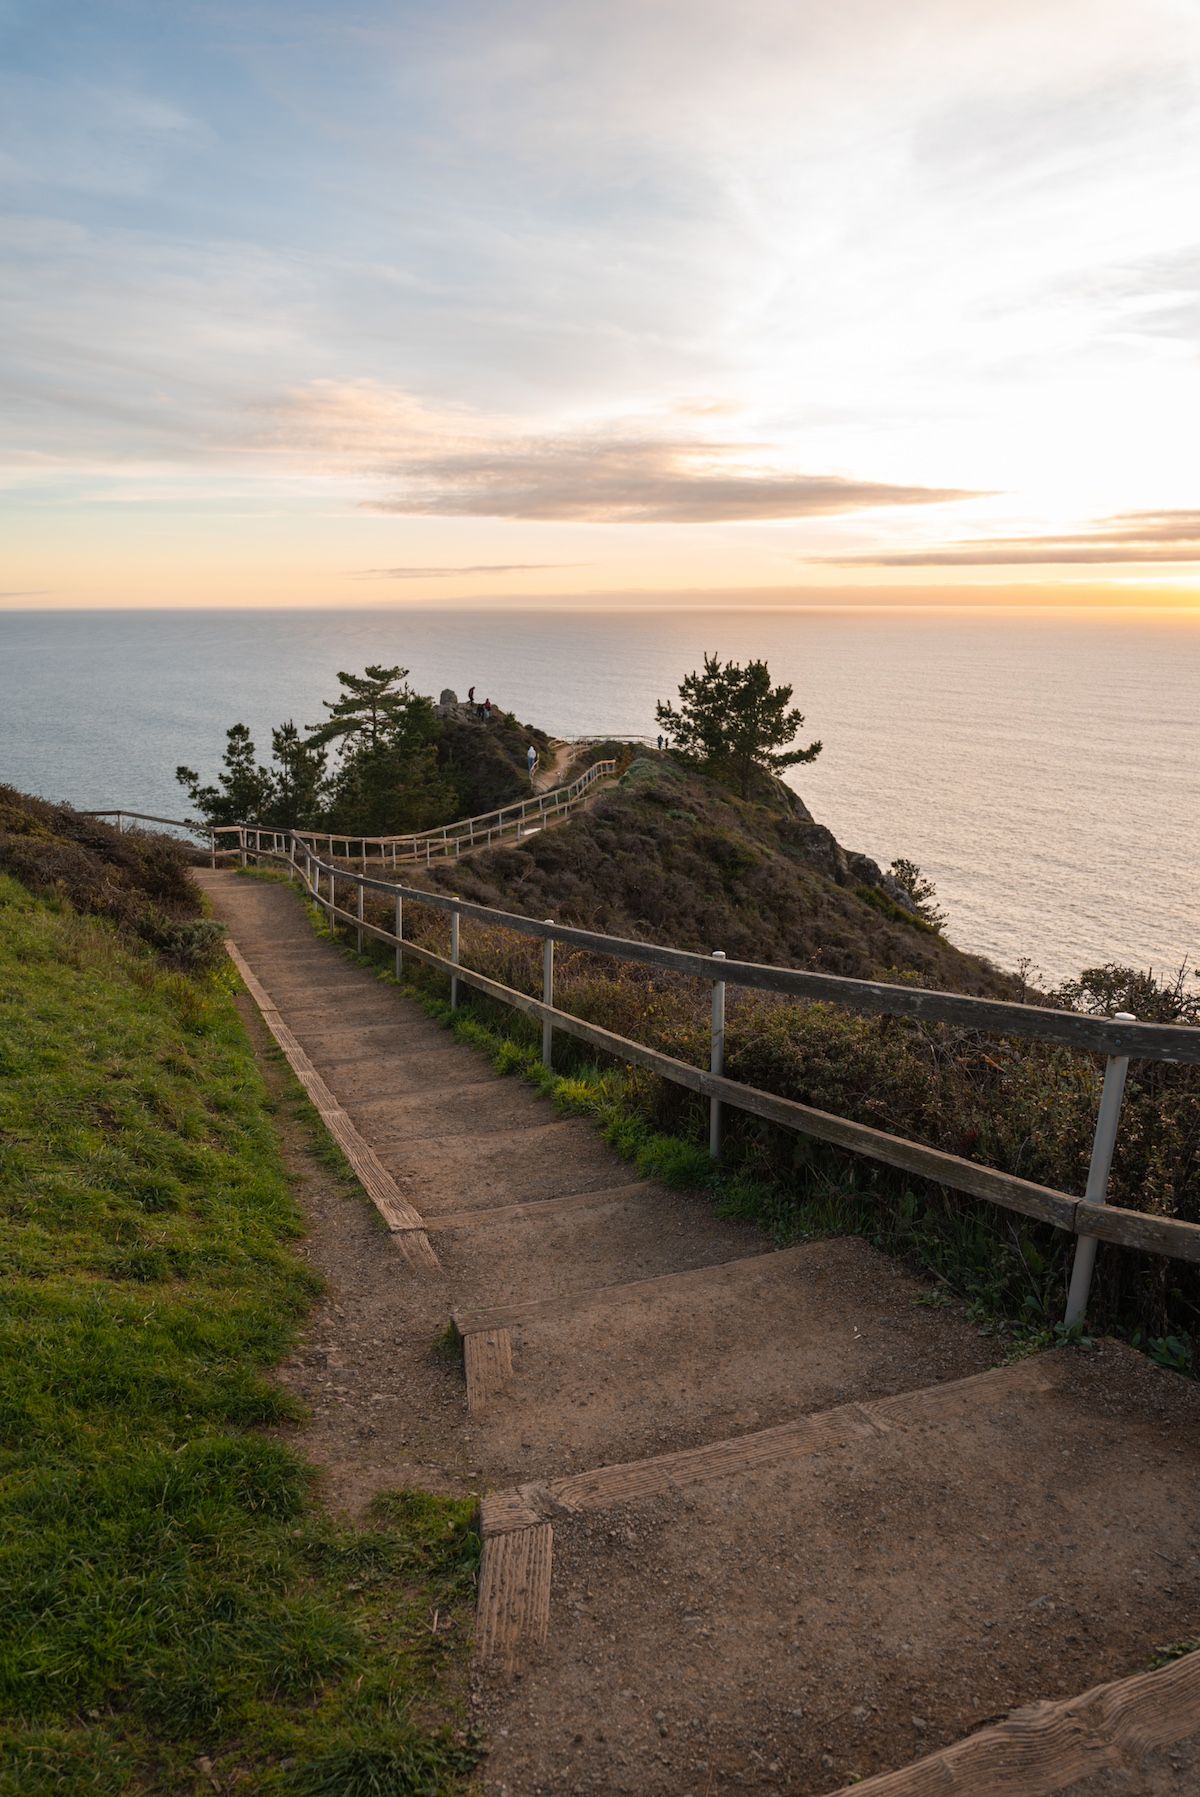 A view looking down some dirt stairs leading towards the Muir Beach Overlook, bathed in the golden light of sunset.